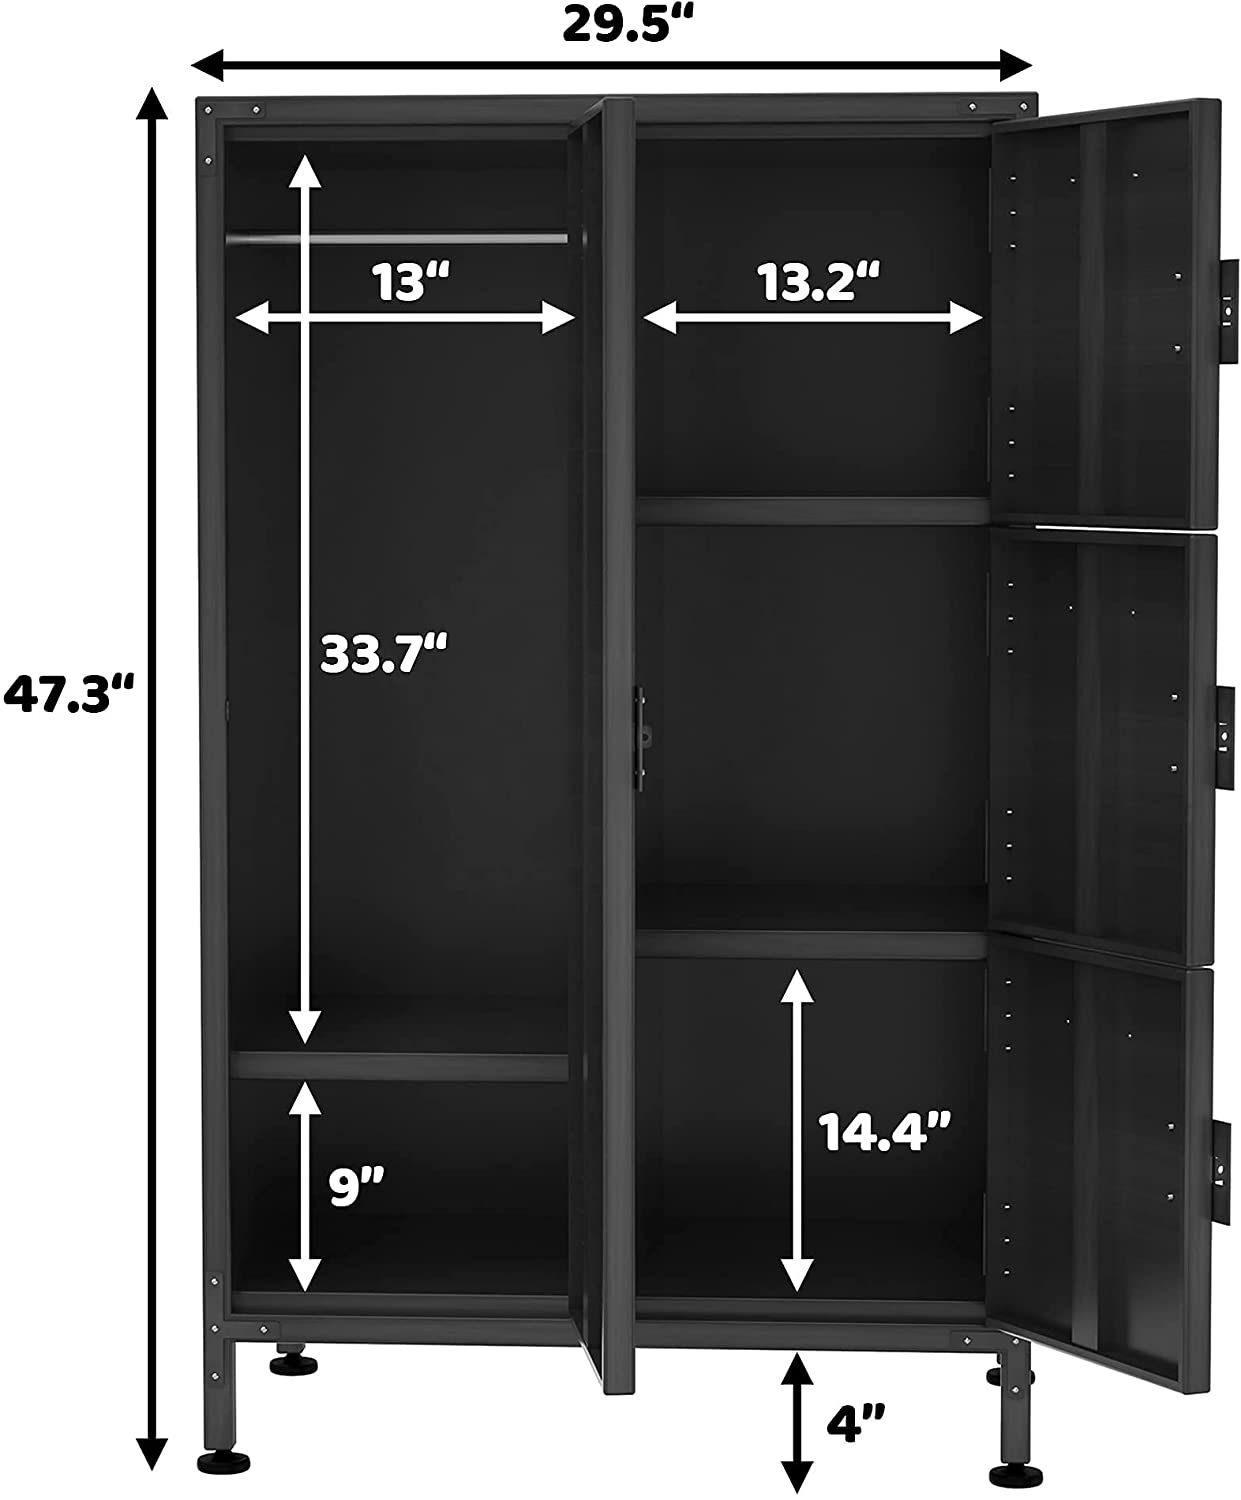 Dimensions of industrial storage cabinet